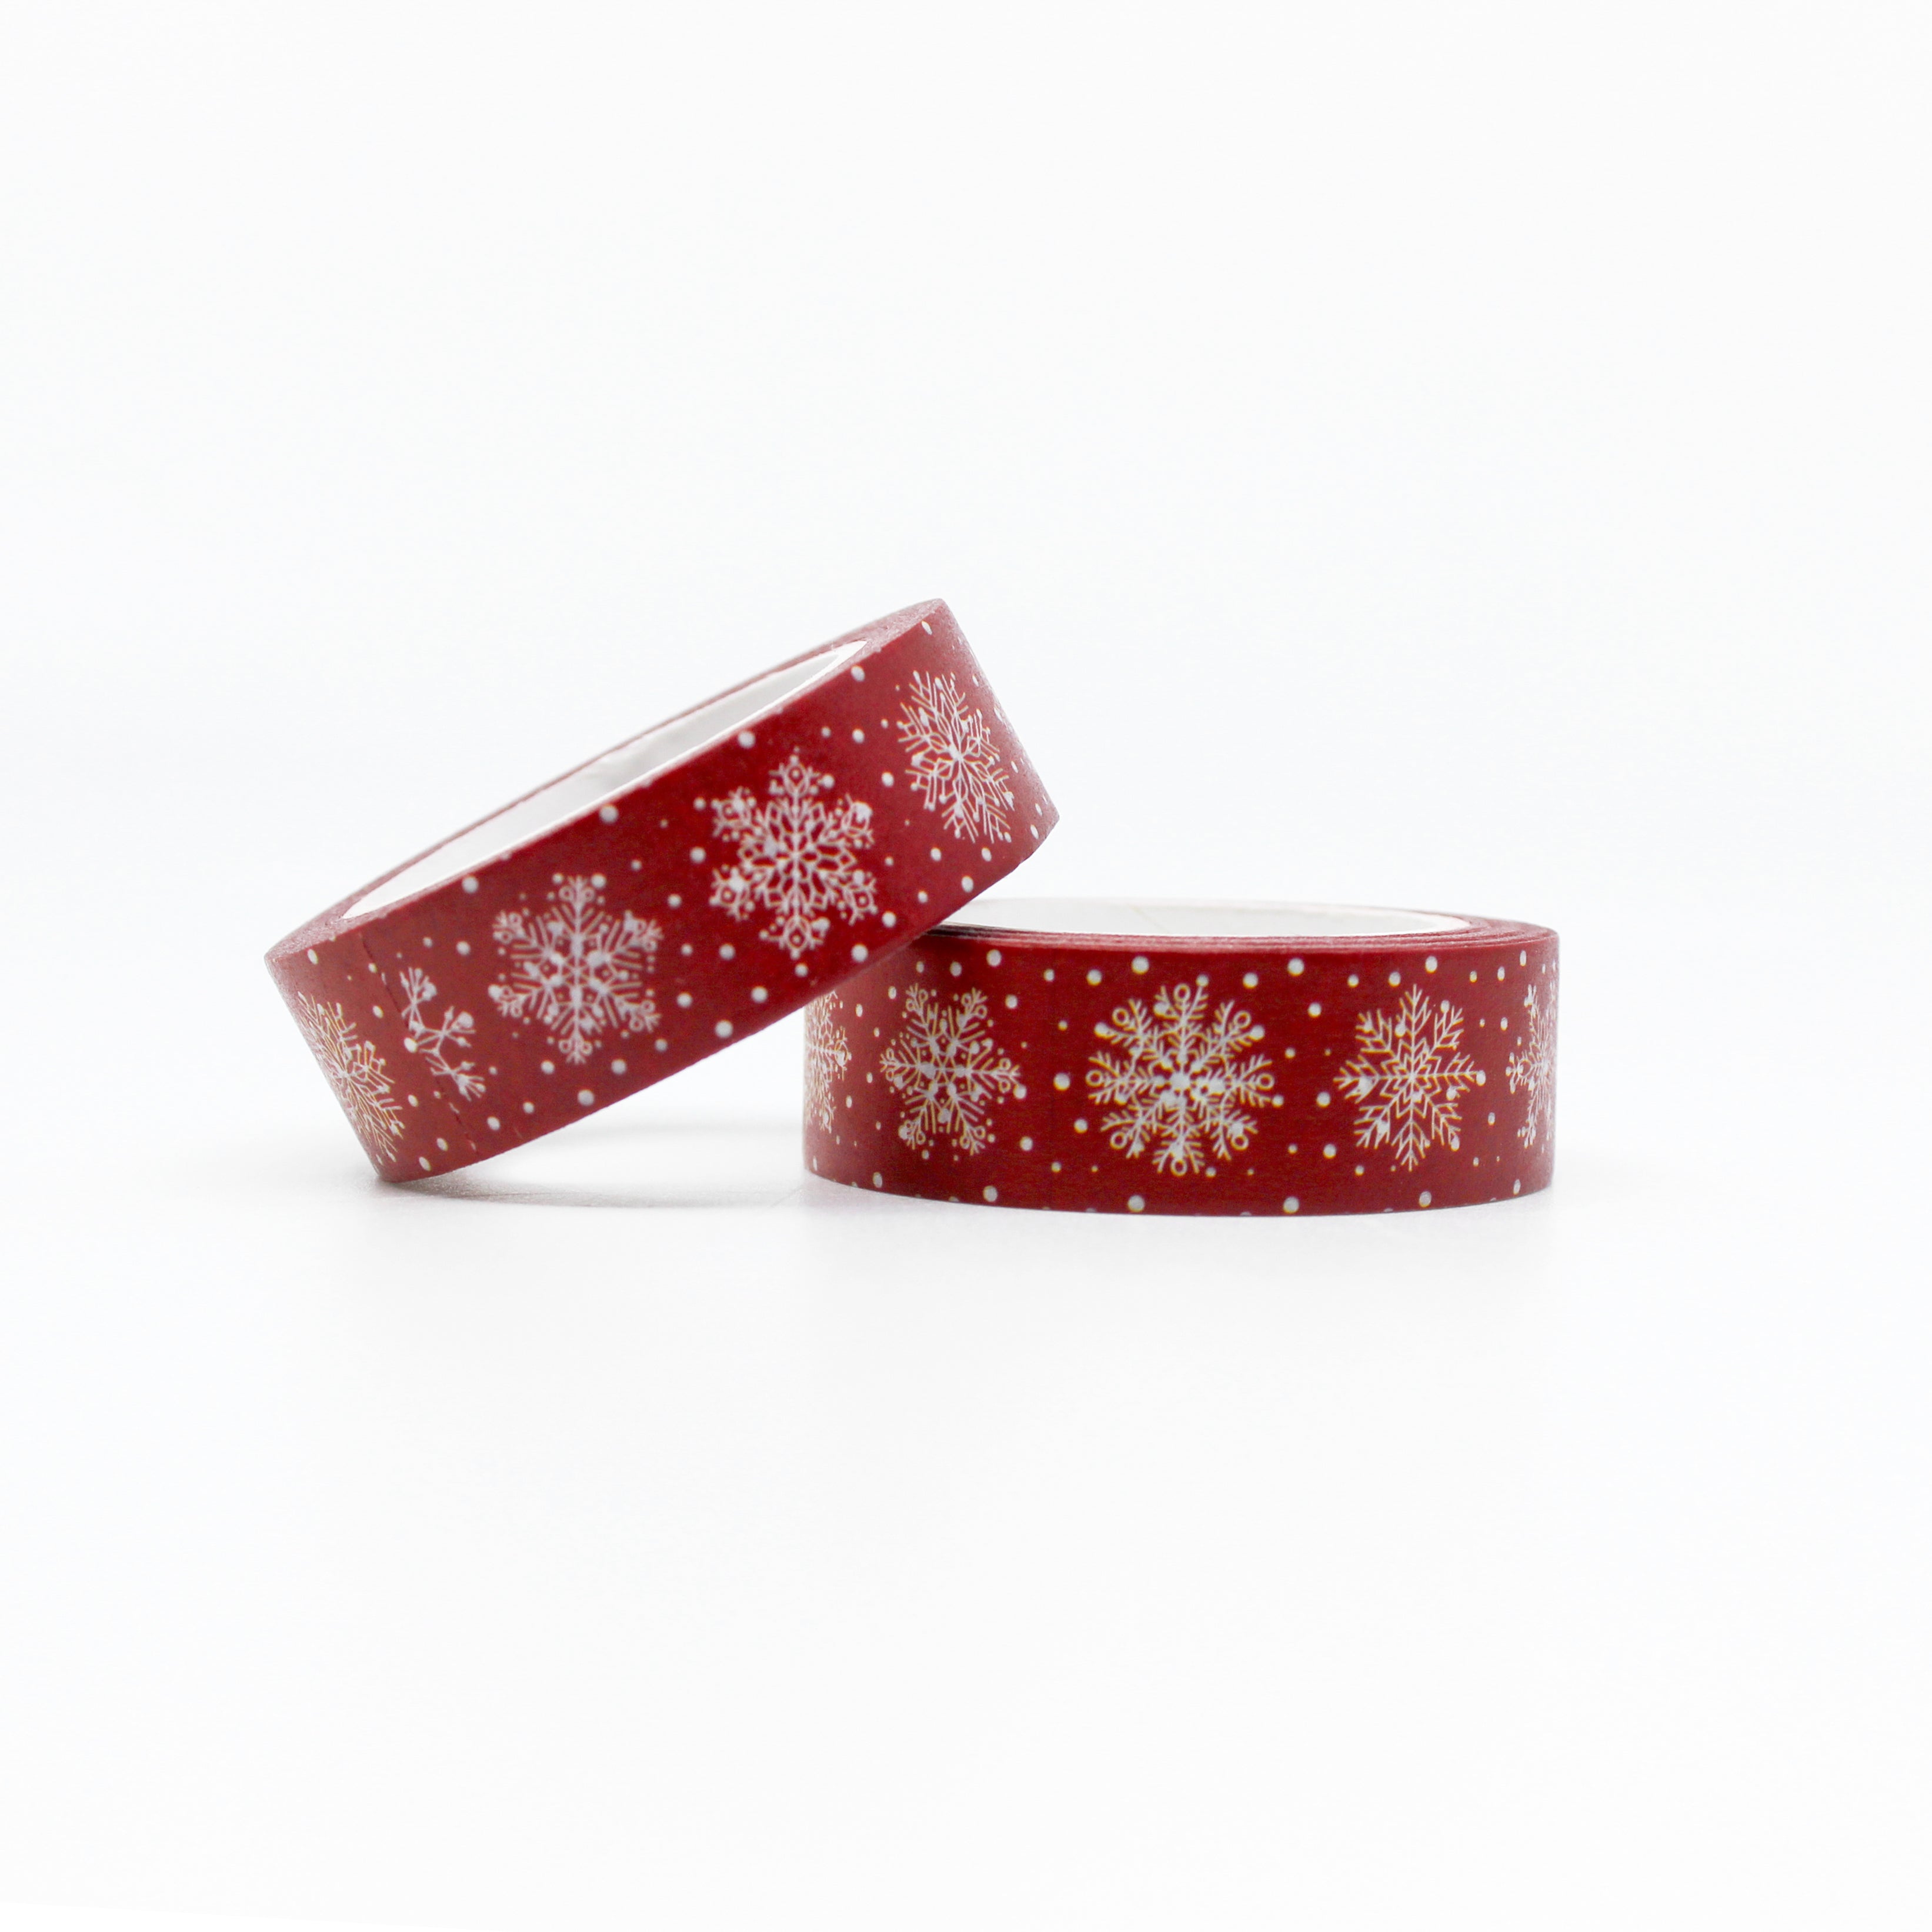 This is a roll of dark red and white snowflakes washi tapes from BBB Supplies Craft Shop